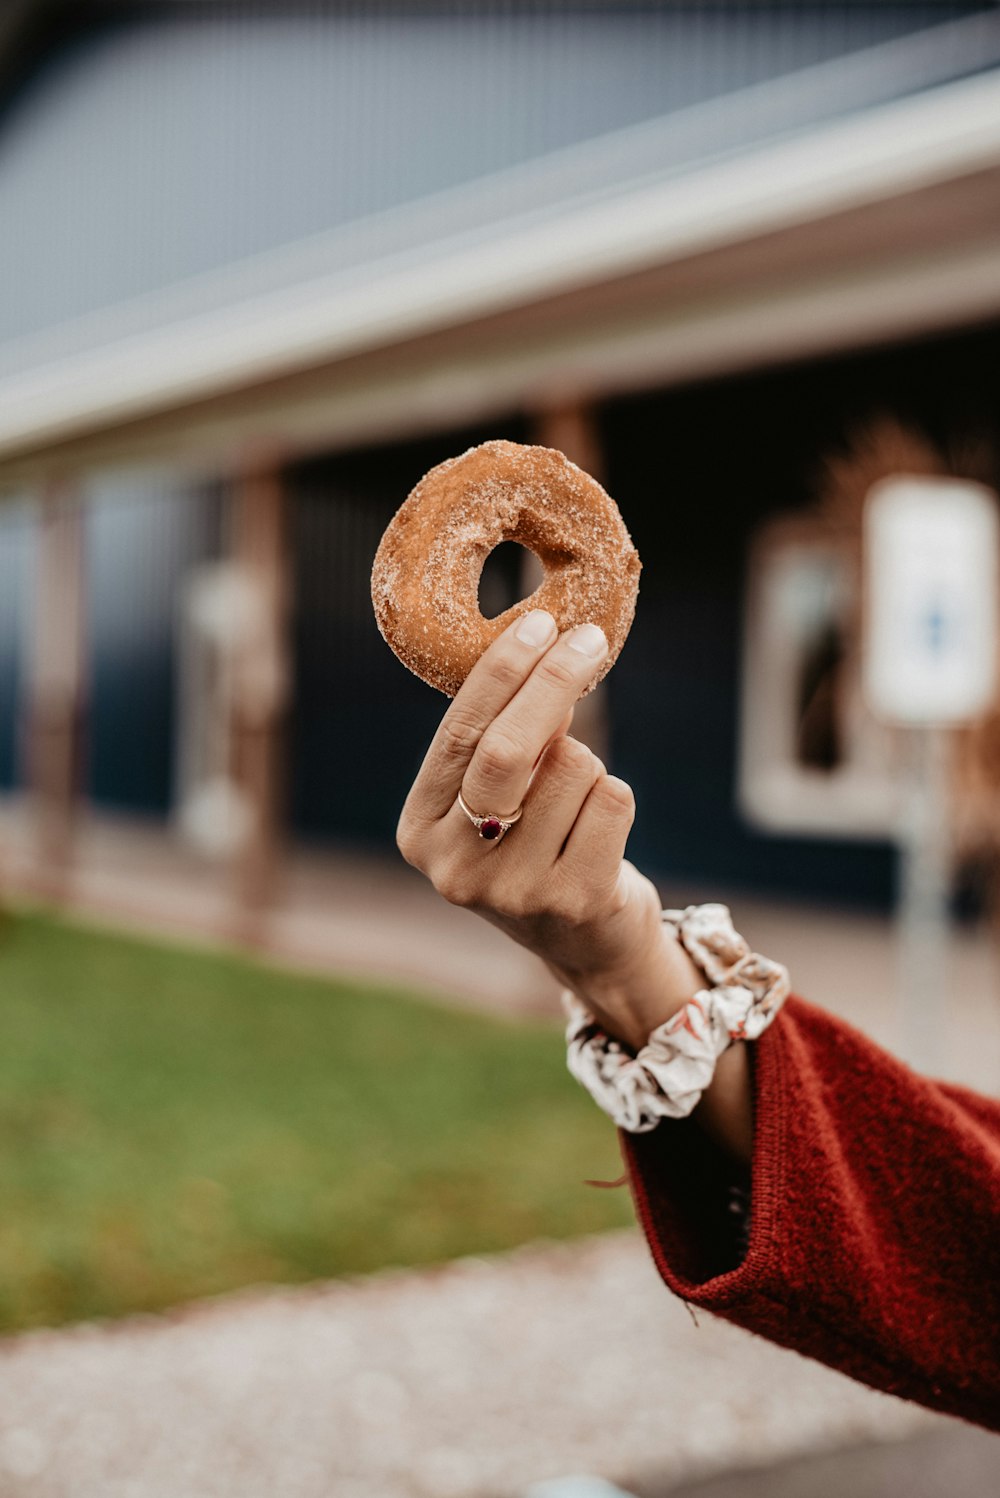 person holding doughnut during daytime